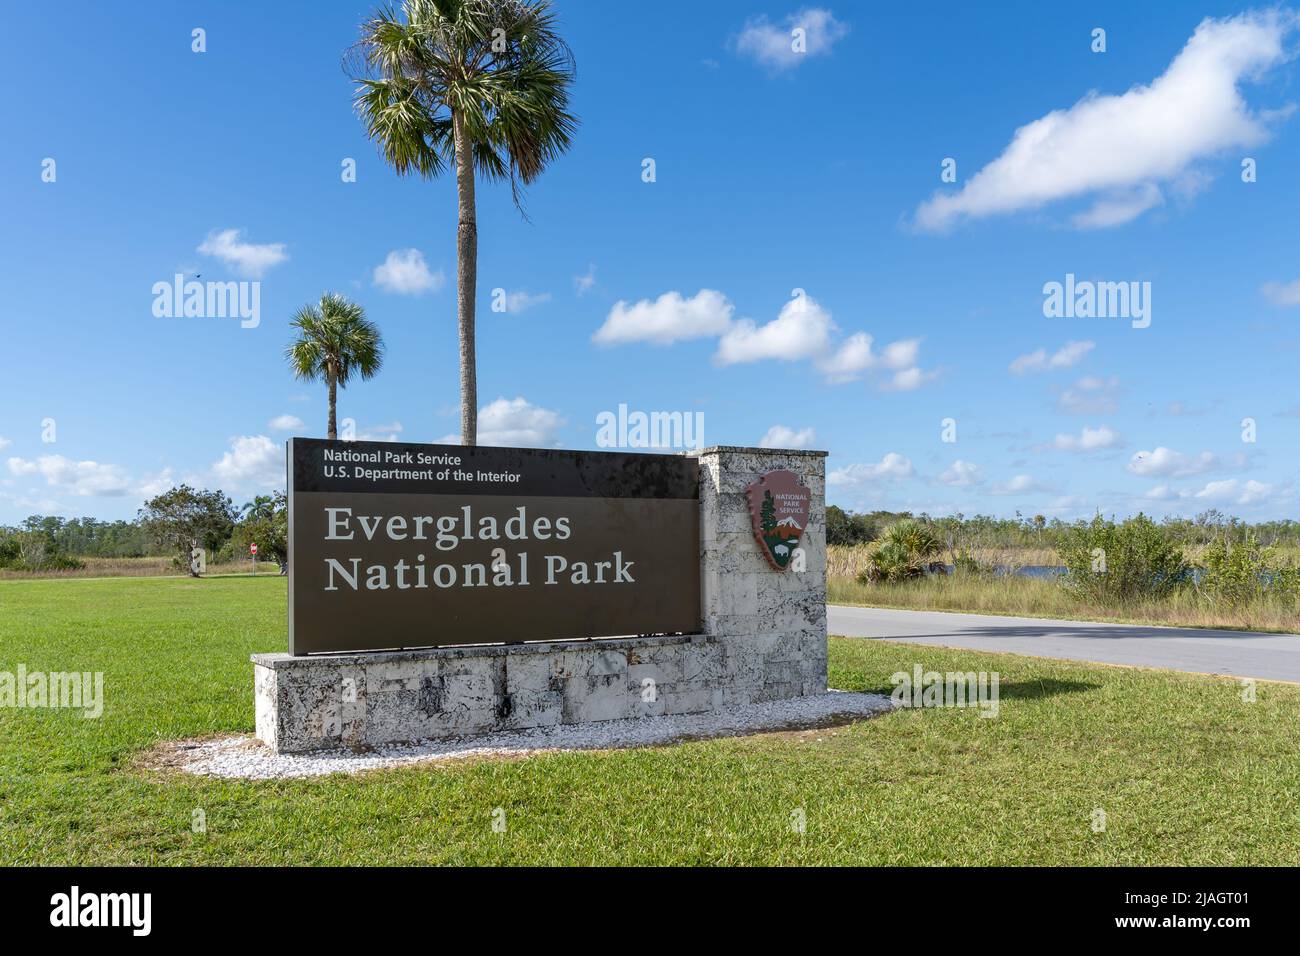 Florida, USA  - January 1, 2022: Everglades National Park sign is shown in Florida, USA. Stock Photo